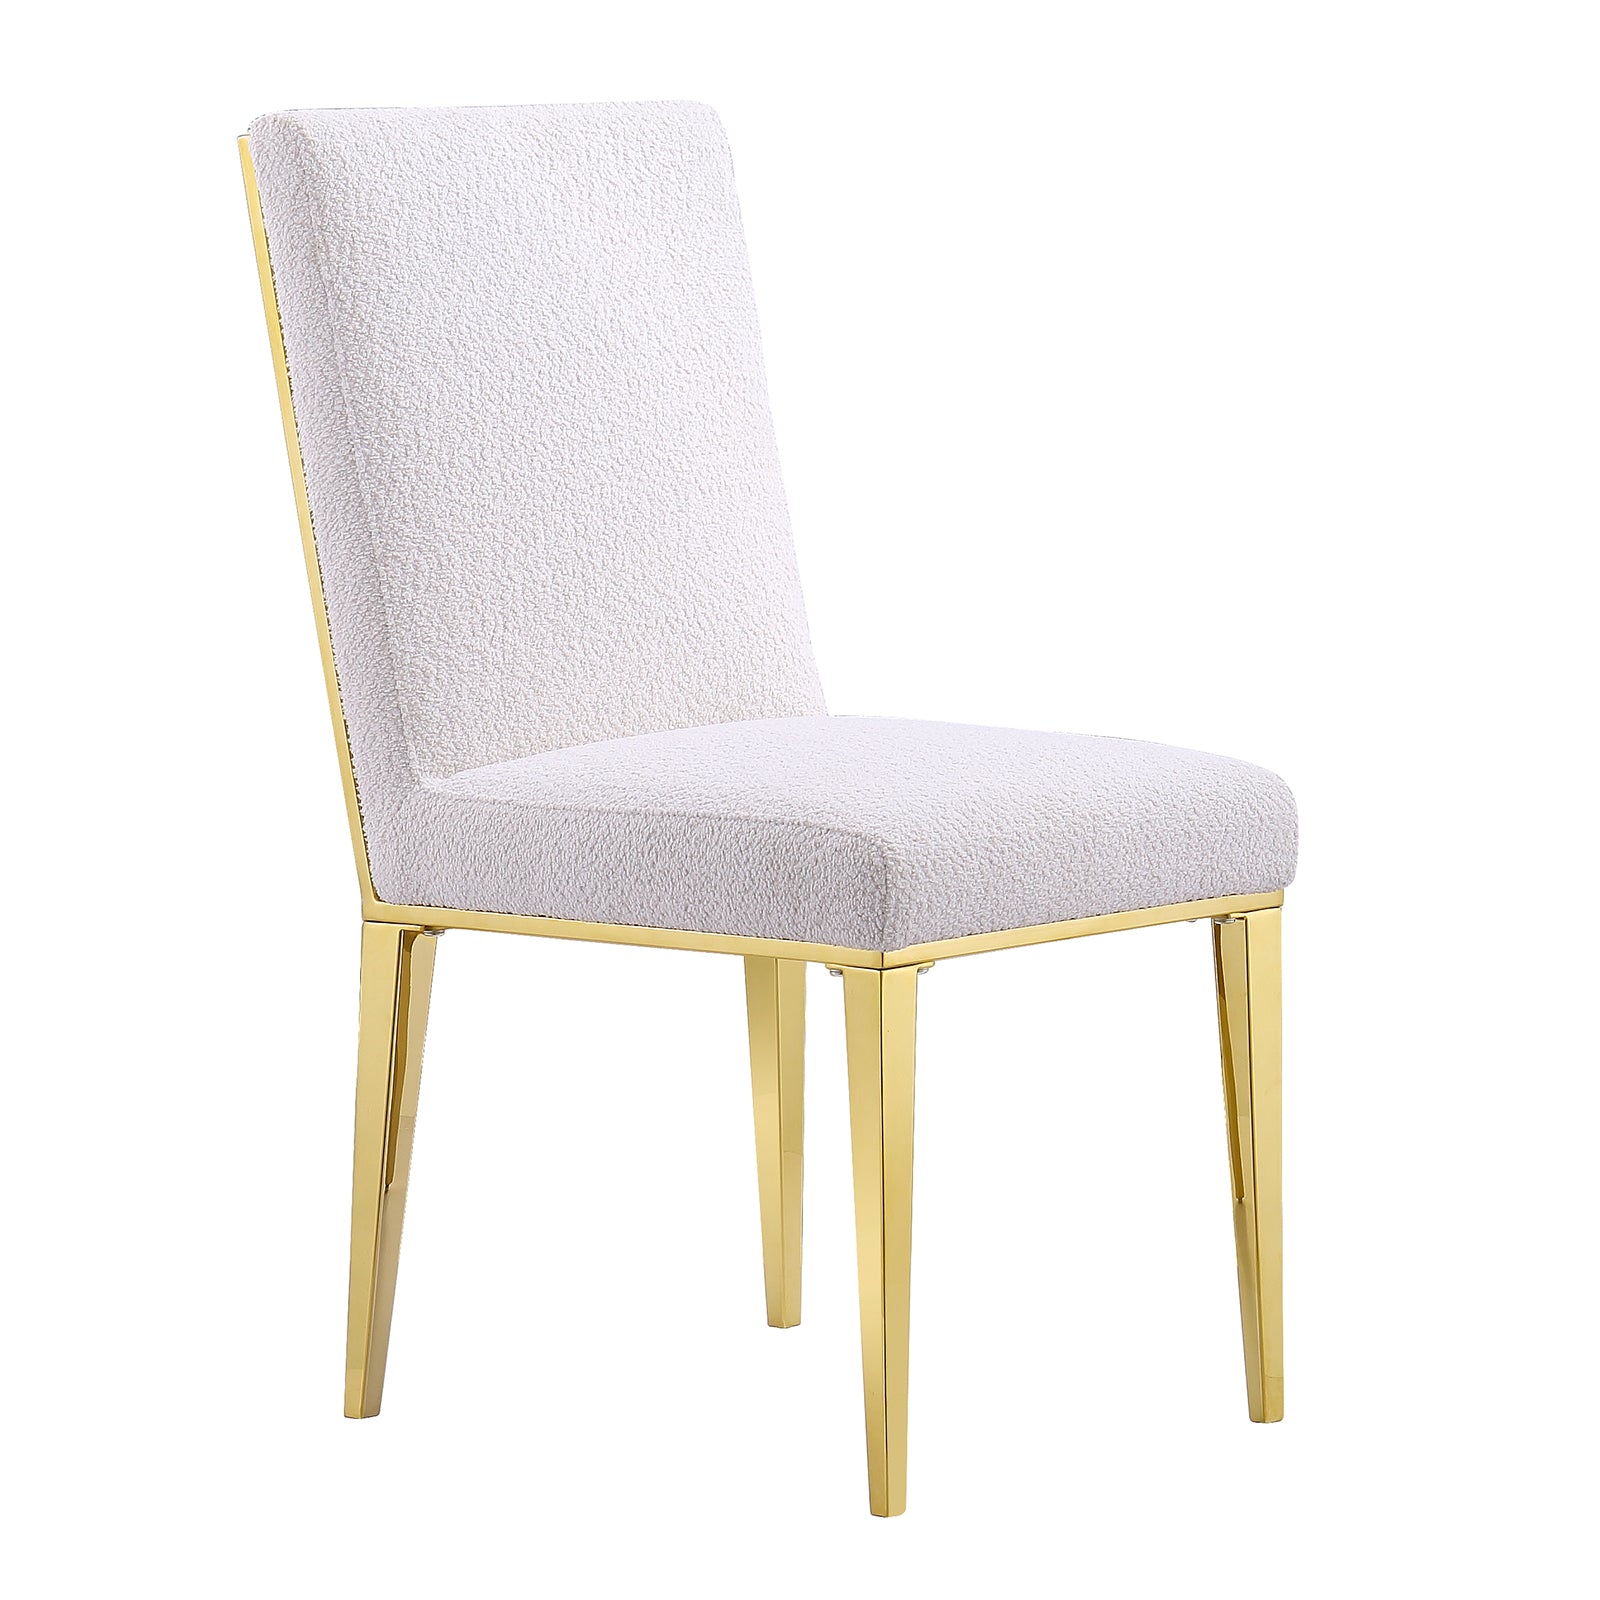 650-Set | AUZ White and Gold Dining room Sets for 6